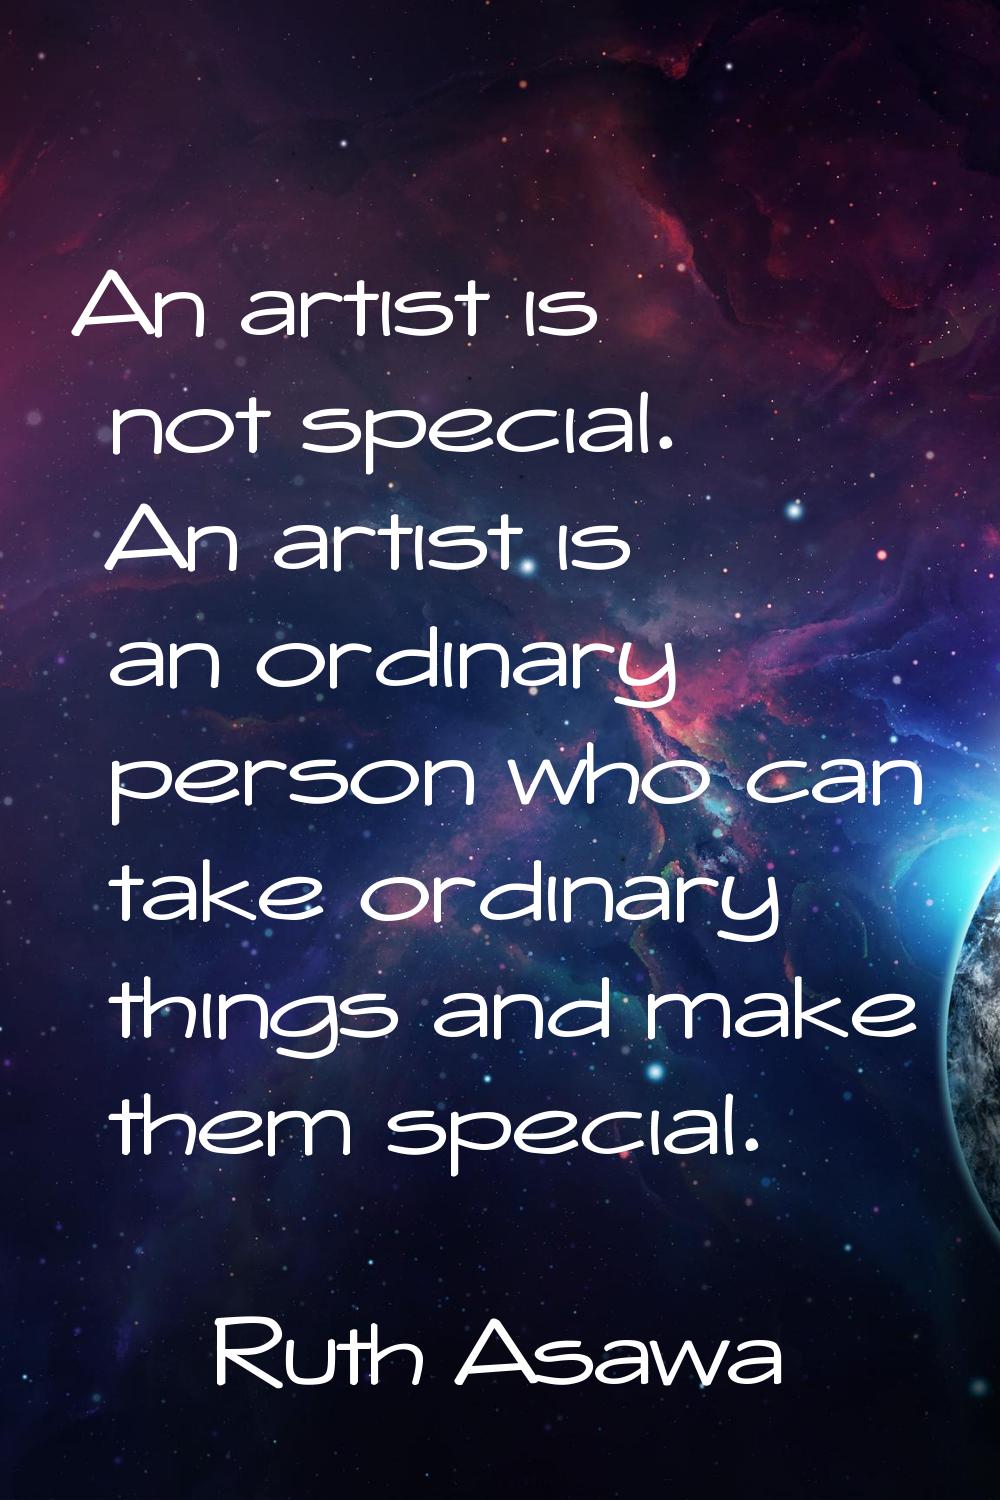 An artist is not special. An artist is an ordinary person who can take ordinary things and make the